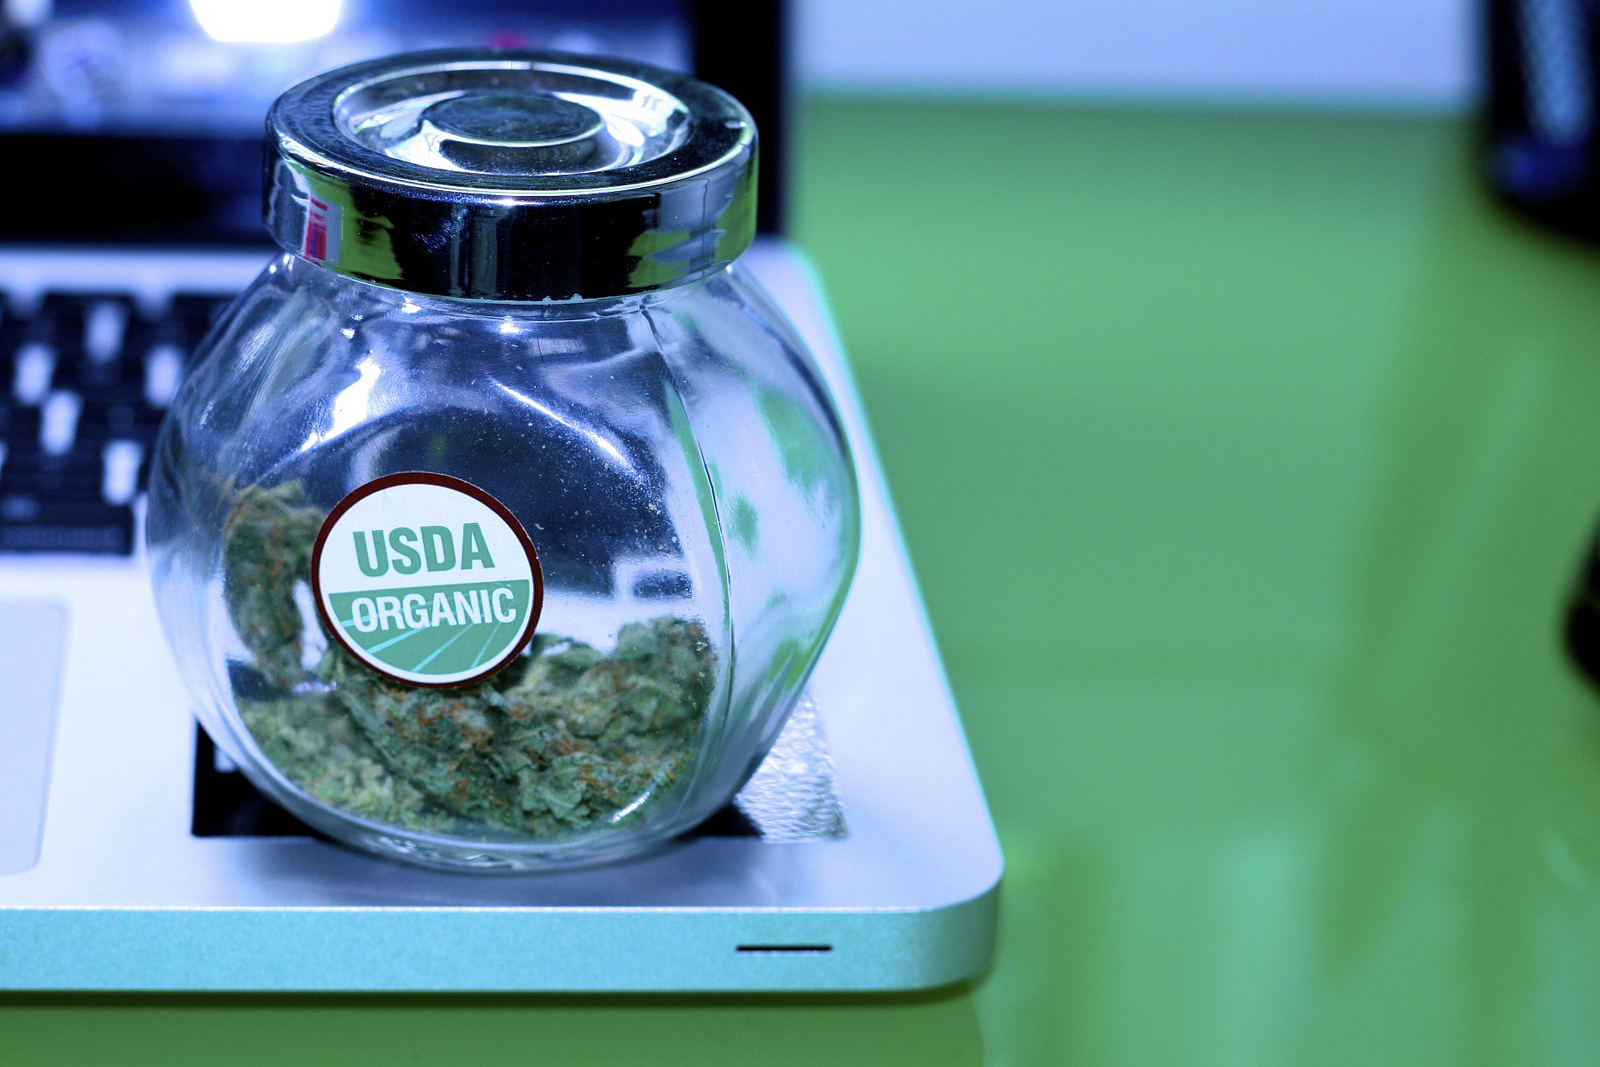 The future of weed seems to be legal, and tech-savvy.